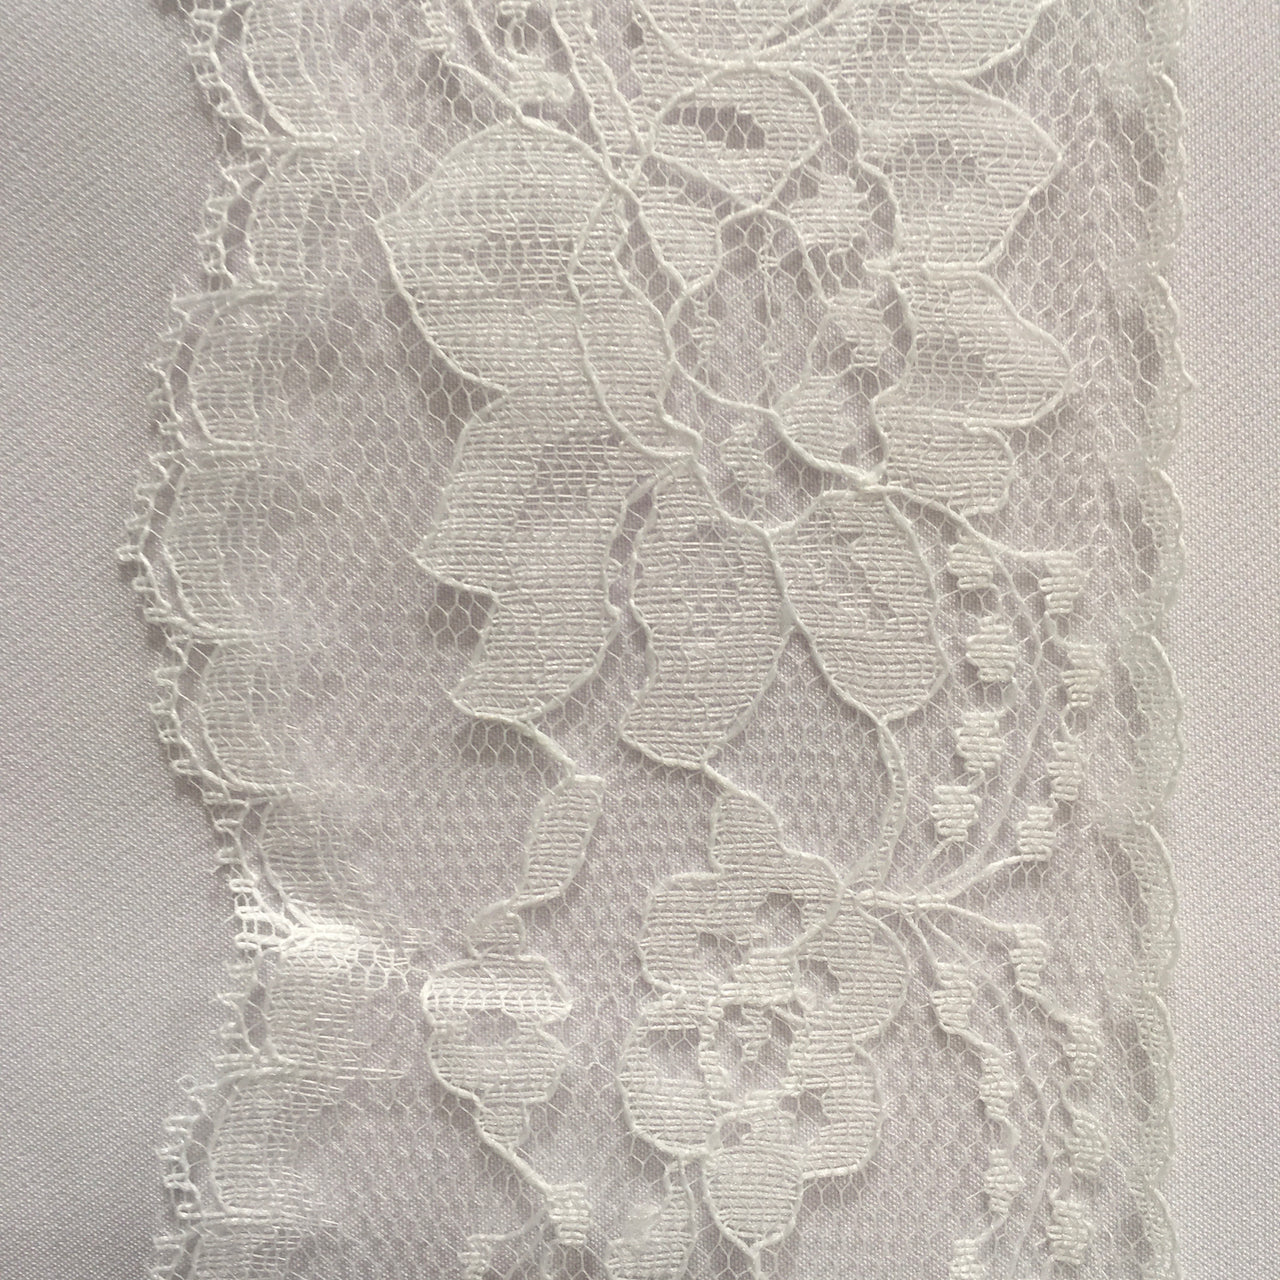 Optic Lace Trim - Simple Rose | Sold by the half yard